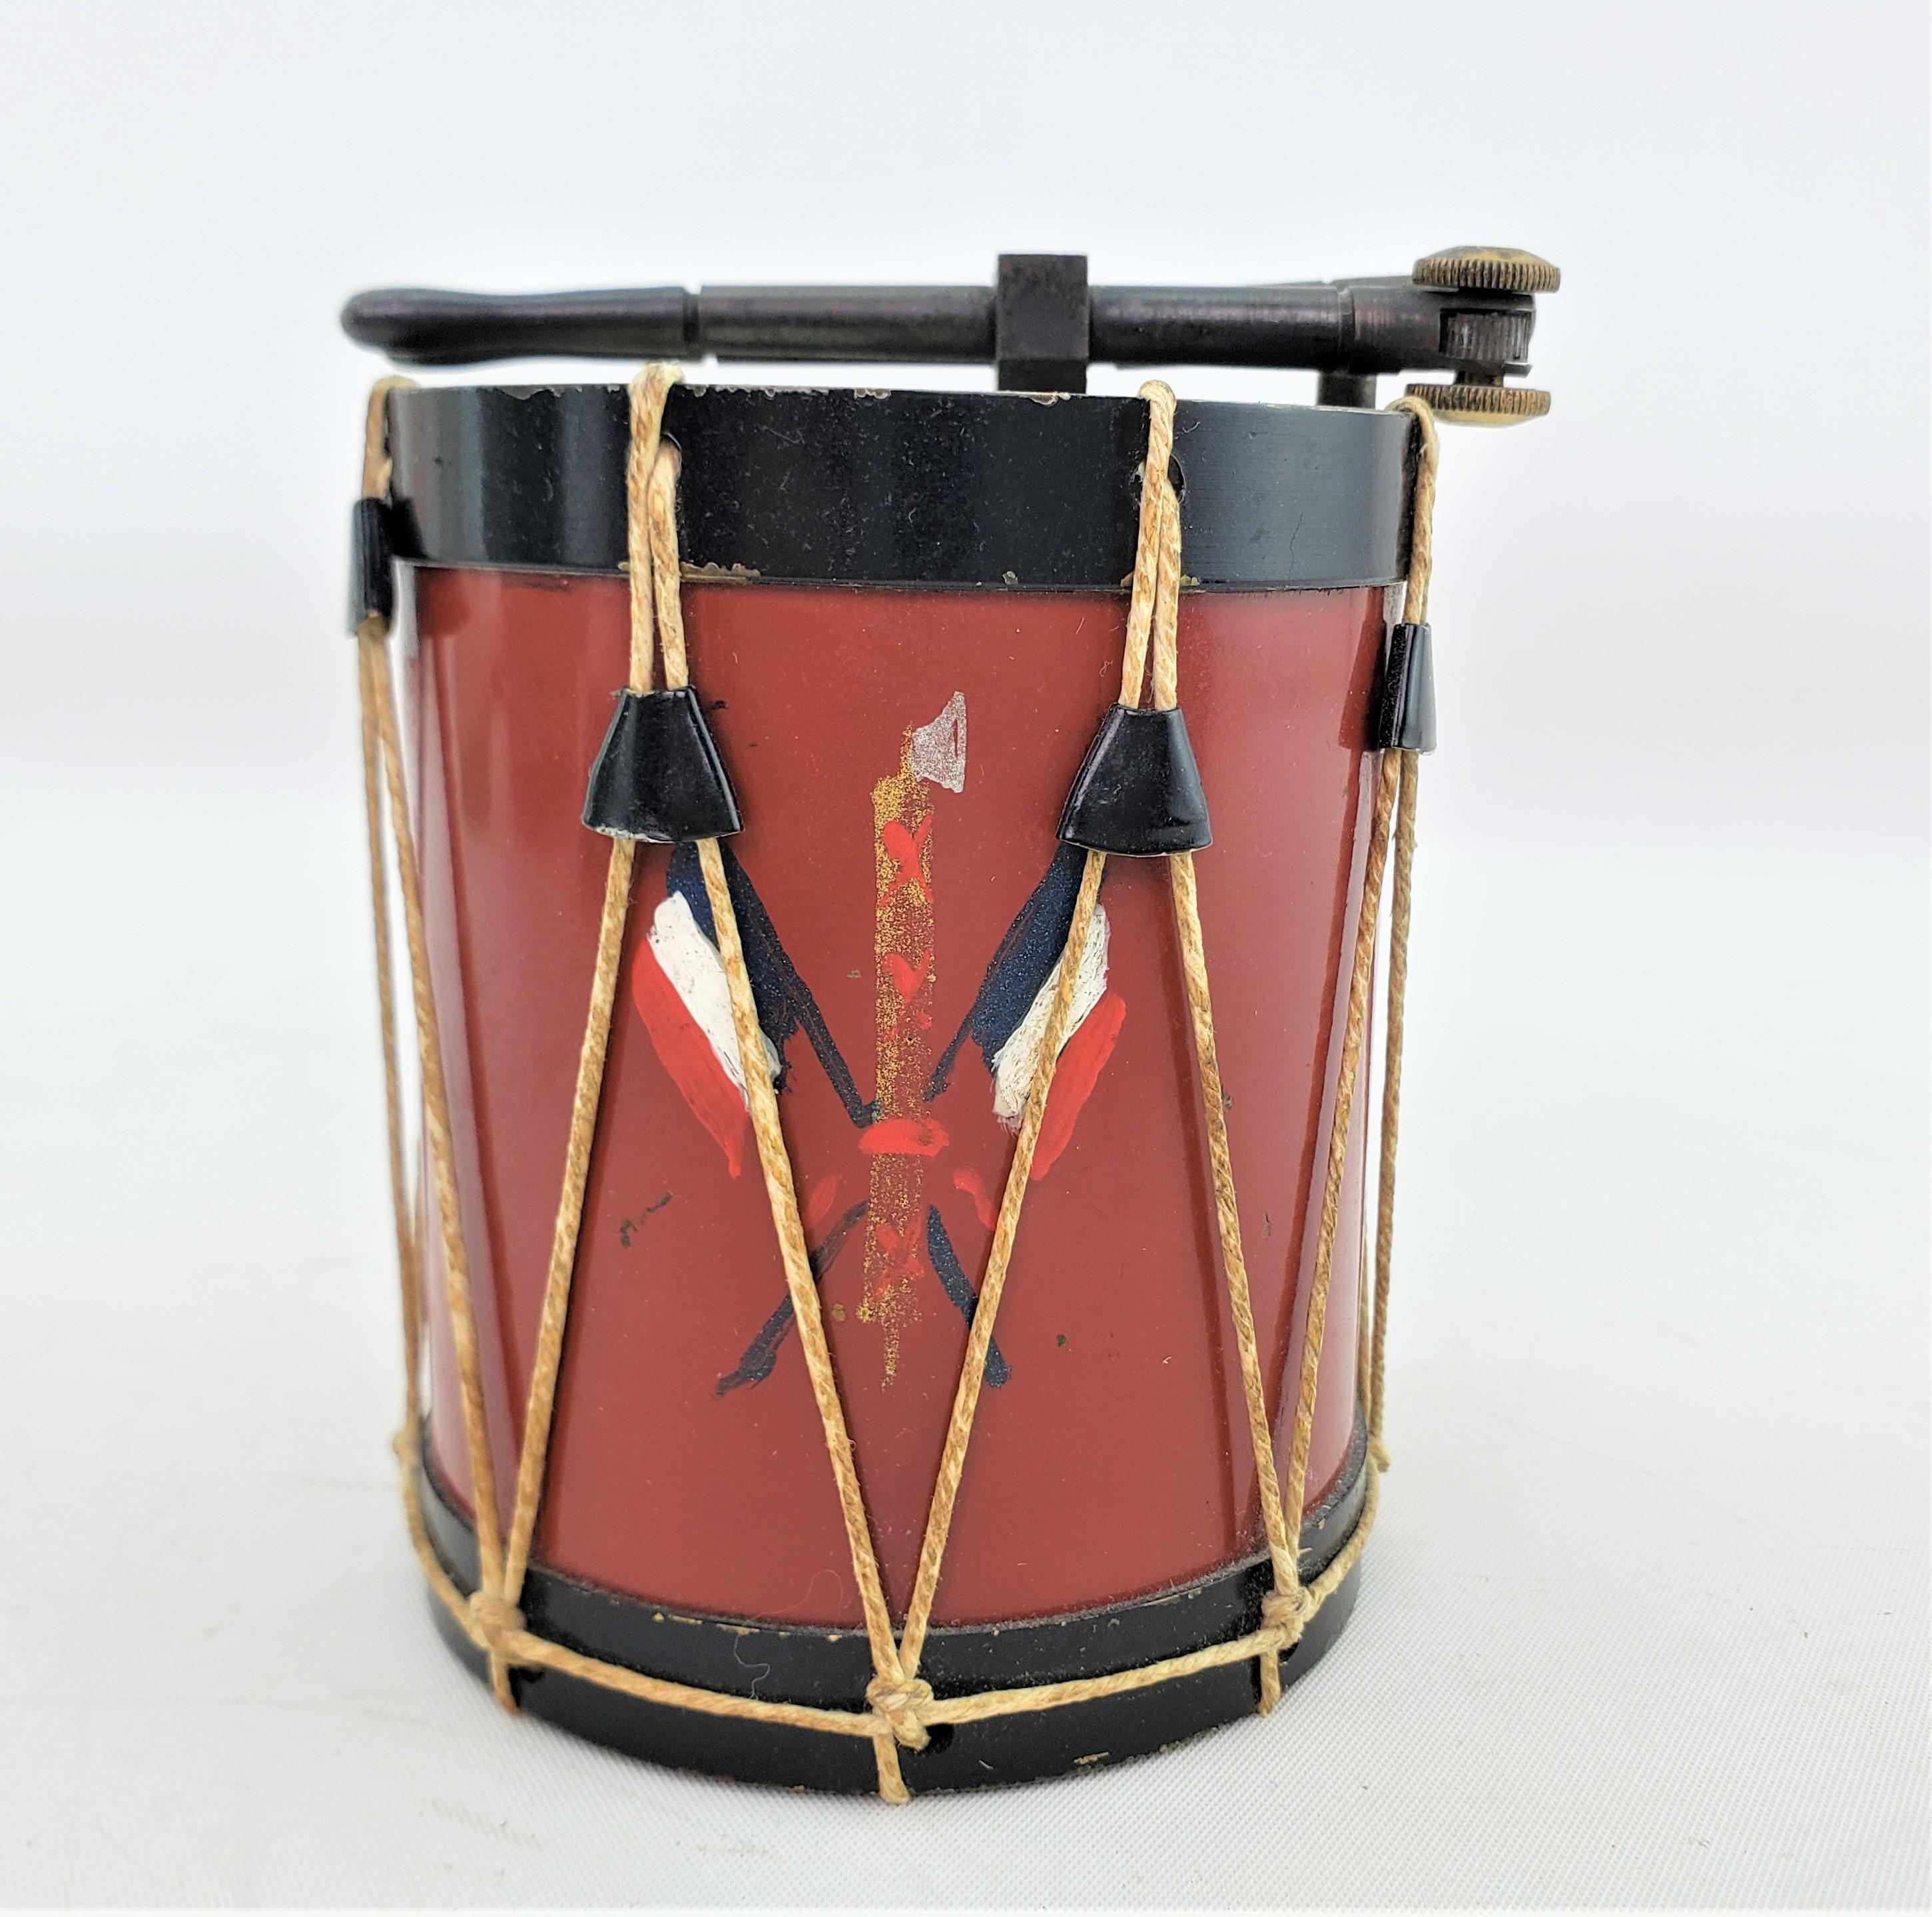 This antique table lighter is unsigned, but presumed to have originated from France and date to approximately 1920 and done in the period Art Deco style. The lighter is done in a realistic manner and resembles a marching band drum with two drum